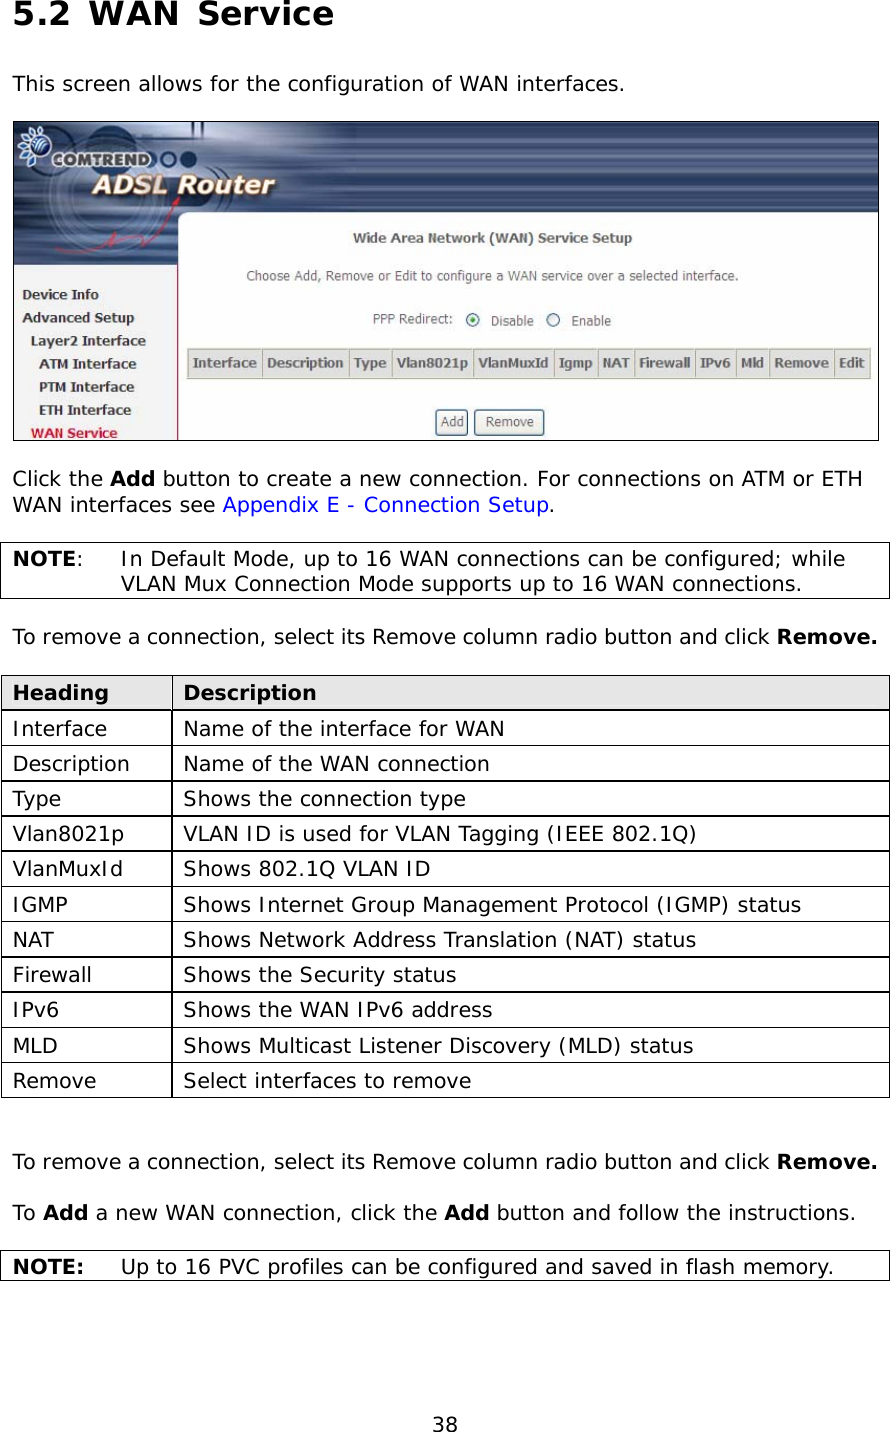  38 5.2 WAN Service This screen allows for the configuration of WAN interfaces.    Click the Add button to create a new connection. For connections on ATM or ETH WAN interfaces see Appendix E - Connection Setup.   NOTE:  In Default Mode, up to 16 WAN connections can be configured; while VLAN Mux Connection Mode supports up to 16 WAN connections.  To remove a connection, select its Remove column radio button and click Remove.  Heading  Description Interface   Name of the interface for WAN Description  Name of the WAN connection Type  Shows the connection type  Vlan8021p  VLAN ID is used for VLAN Tagging (IEEE 802.1Q) VlanMuxId  Shows 802.1Q VLAN ID IGMP  Shows Internet Group Management Protocol (IGMP) status NAT  Shows Network Address Translation (NAT) status Firewall  Shows the Security status IPv6  Shows the WAN IPv6 address MLD  Shows Multicast Listener Discovery (MLD) status Remove  Select interfaces to remove   To remove a connection, select its Remove column radio button and click Remove.  To Add a new WAN connection, click the Add button and follow the instructions.  NOTE:  Up to 16 PVC profiles can be configured and saved in flash memory.    